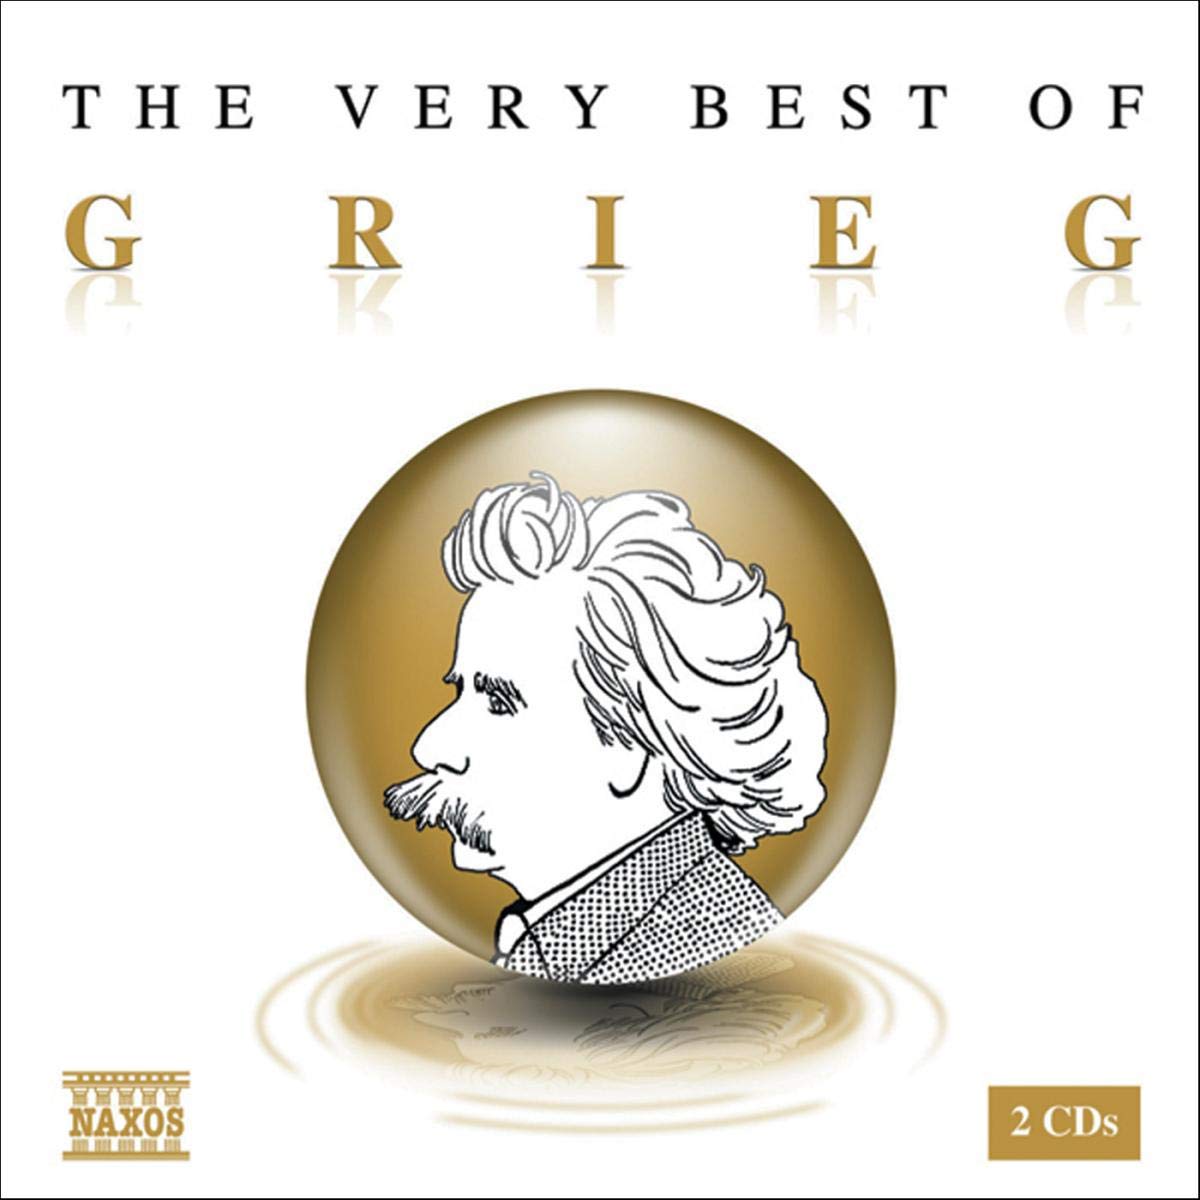 THE VERY BEST OF GRIEG